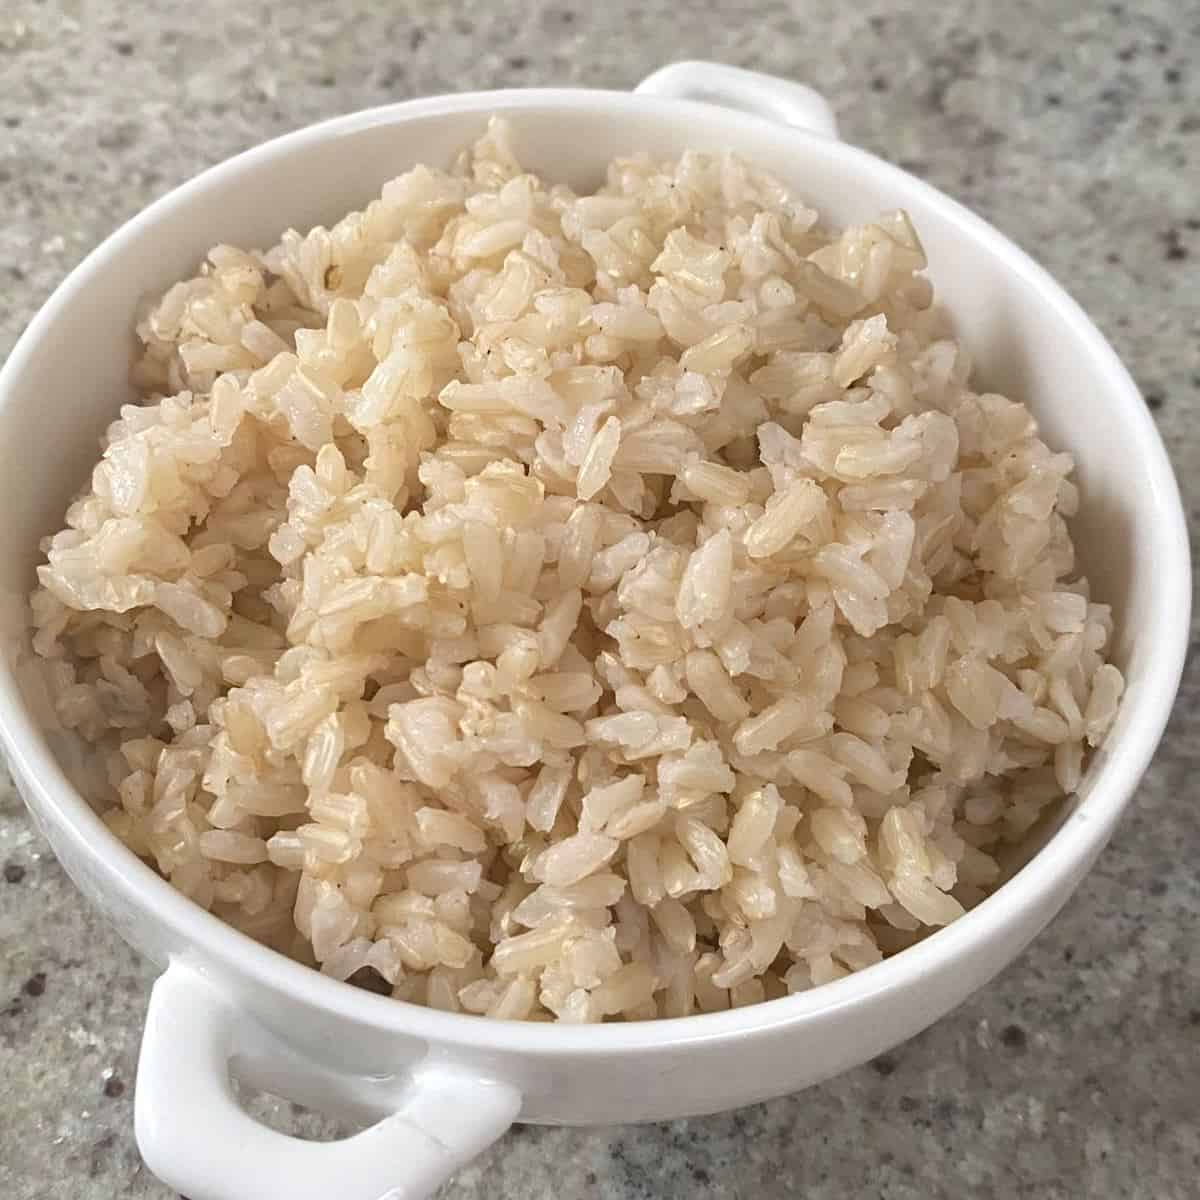 Easy Slow Cooker Brown Rice